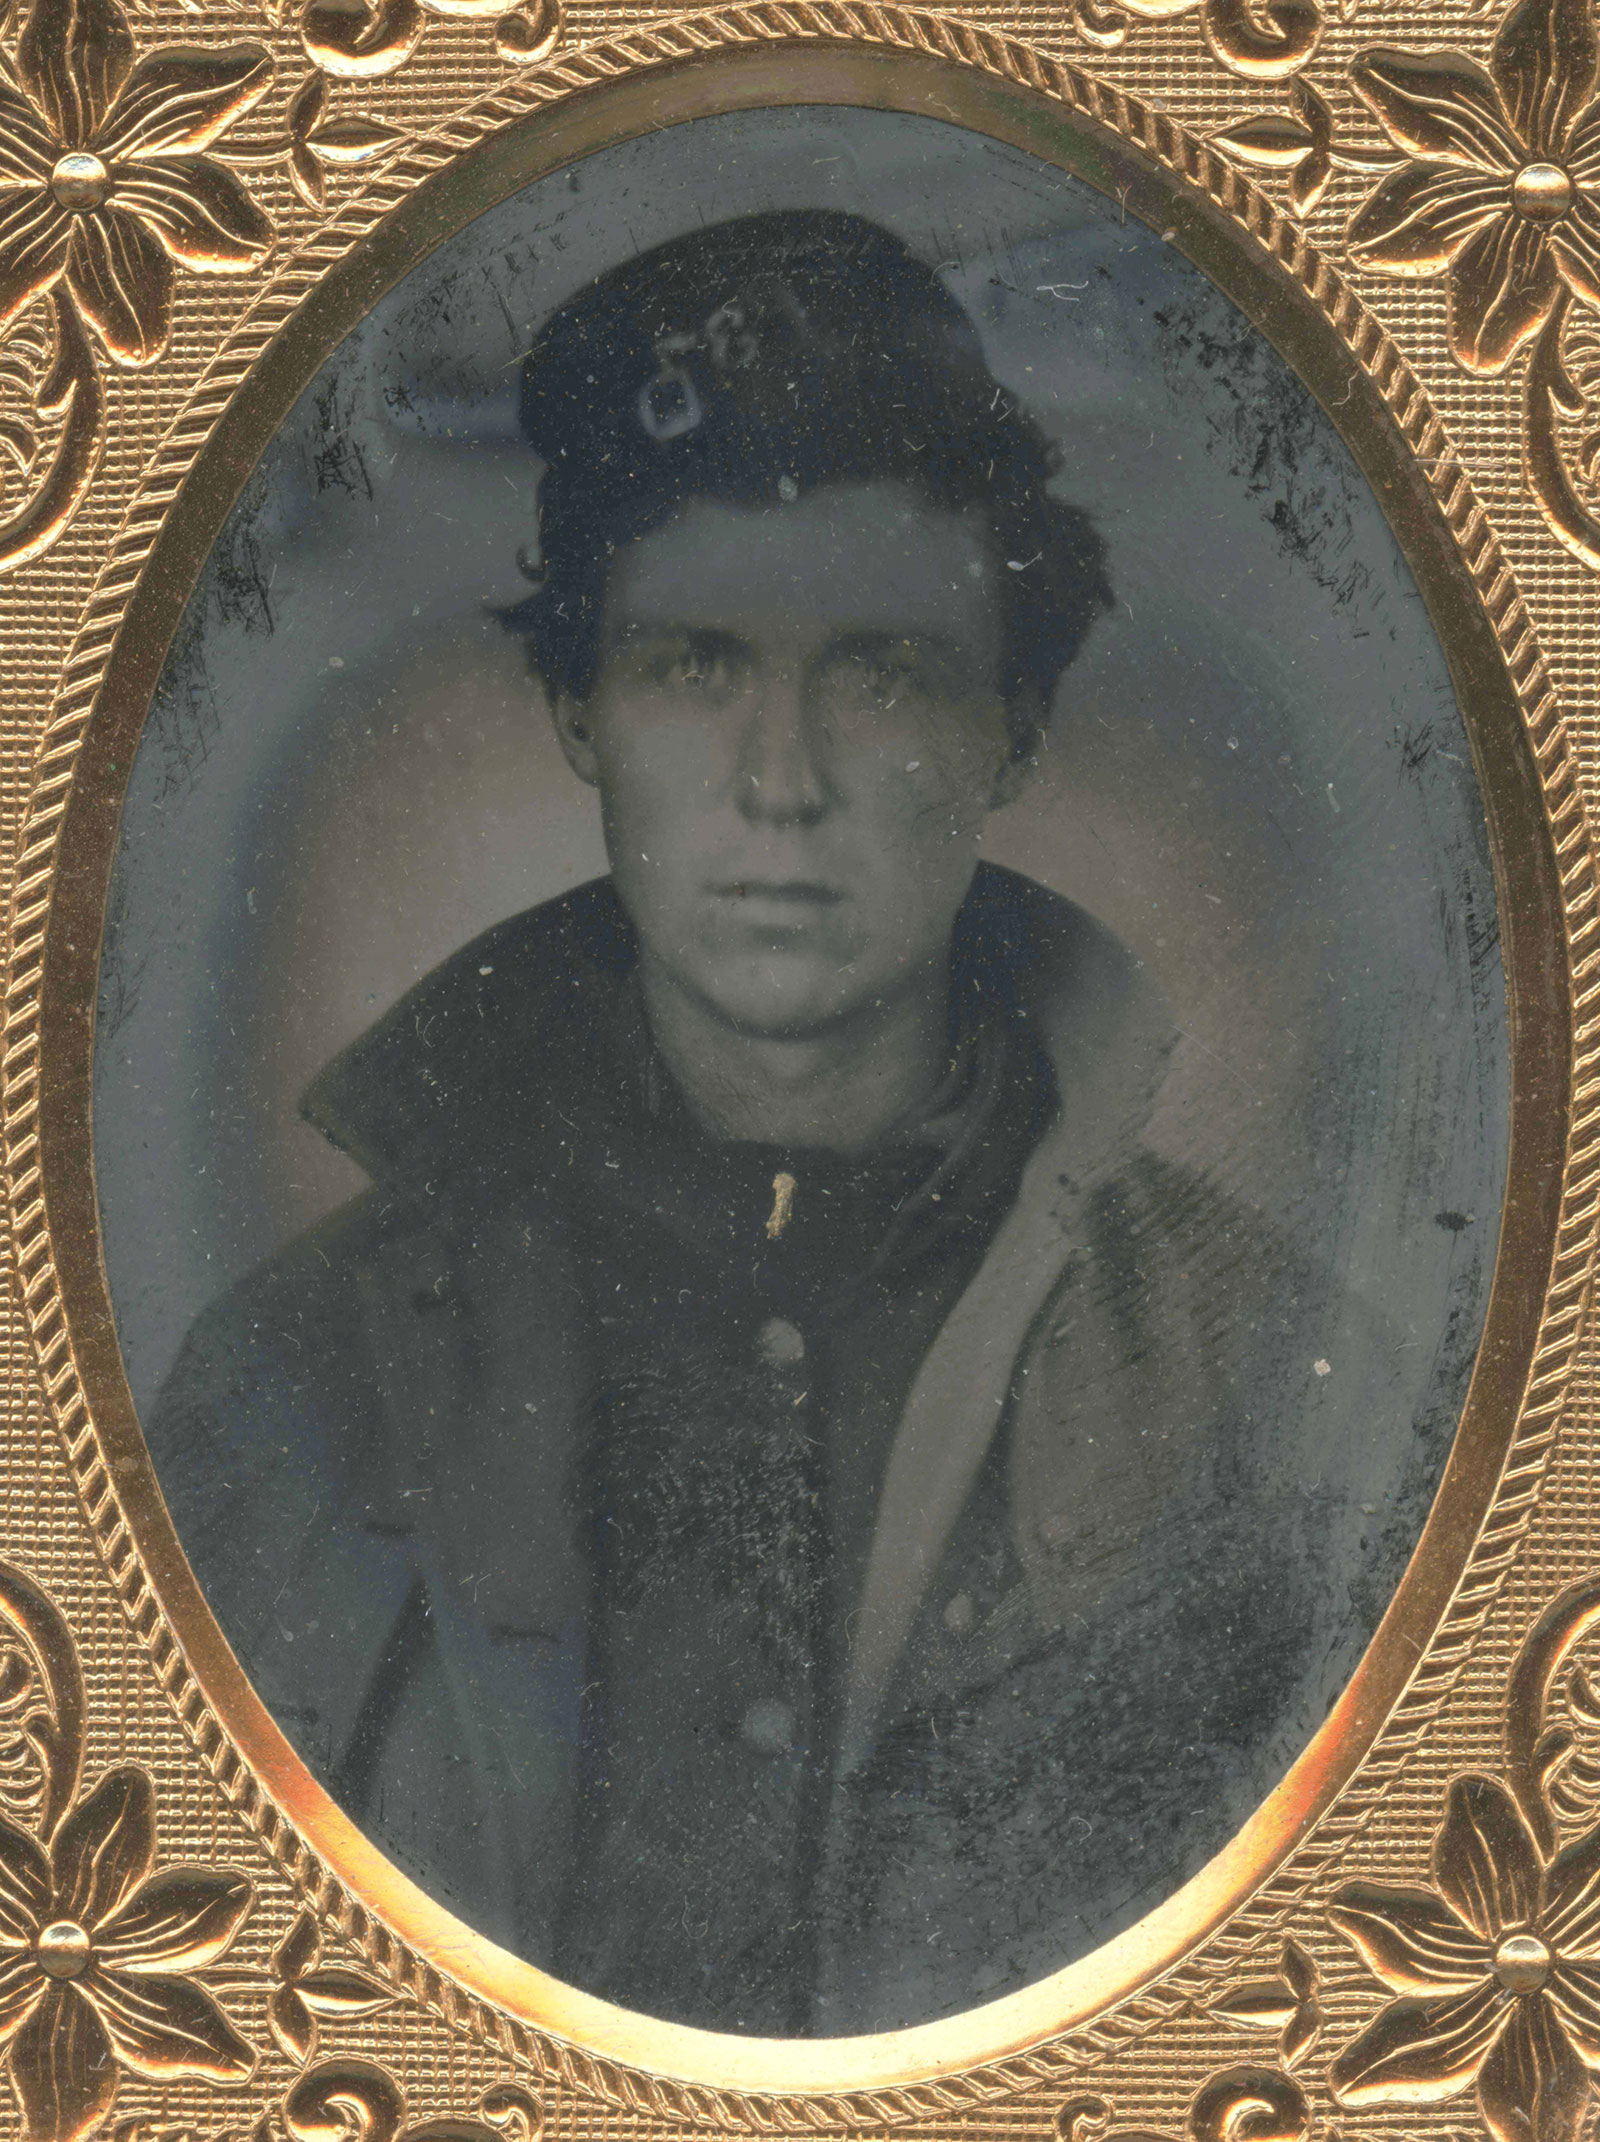 A photo of the Union Army soldier Derastus Nelson.